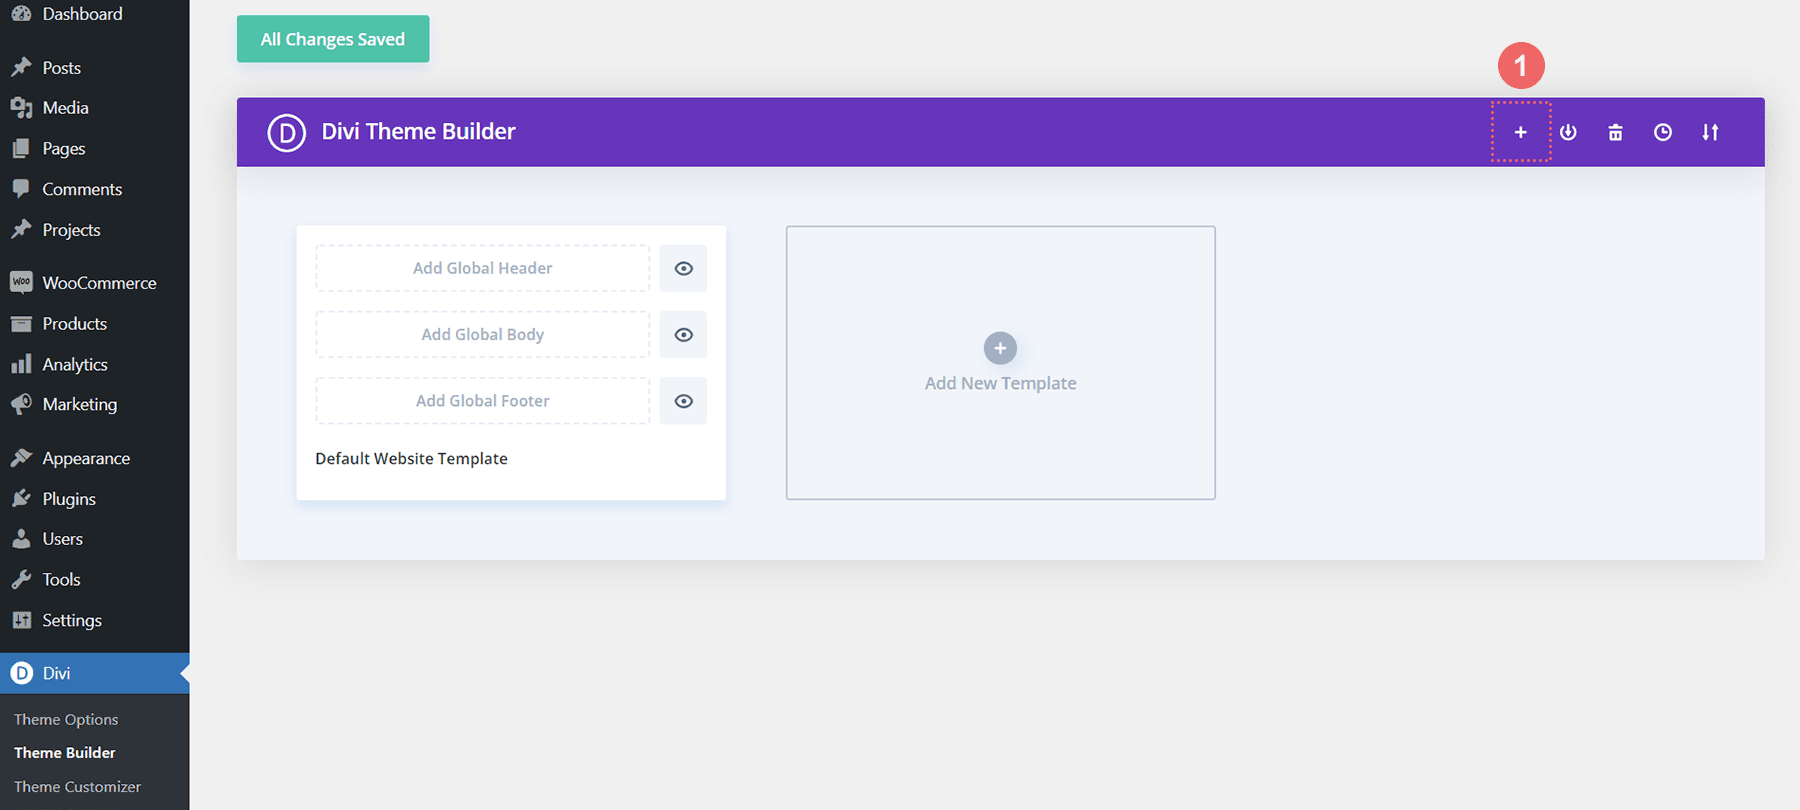 Open the Sets Library within the Divi Theme Builder